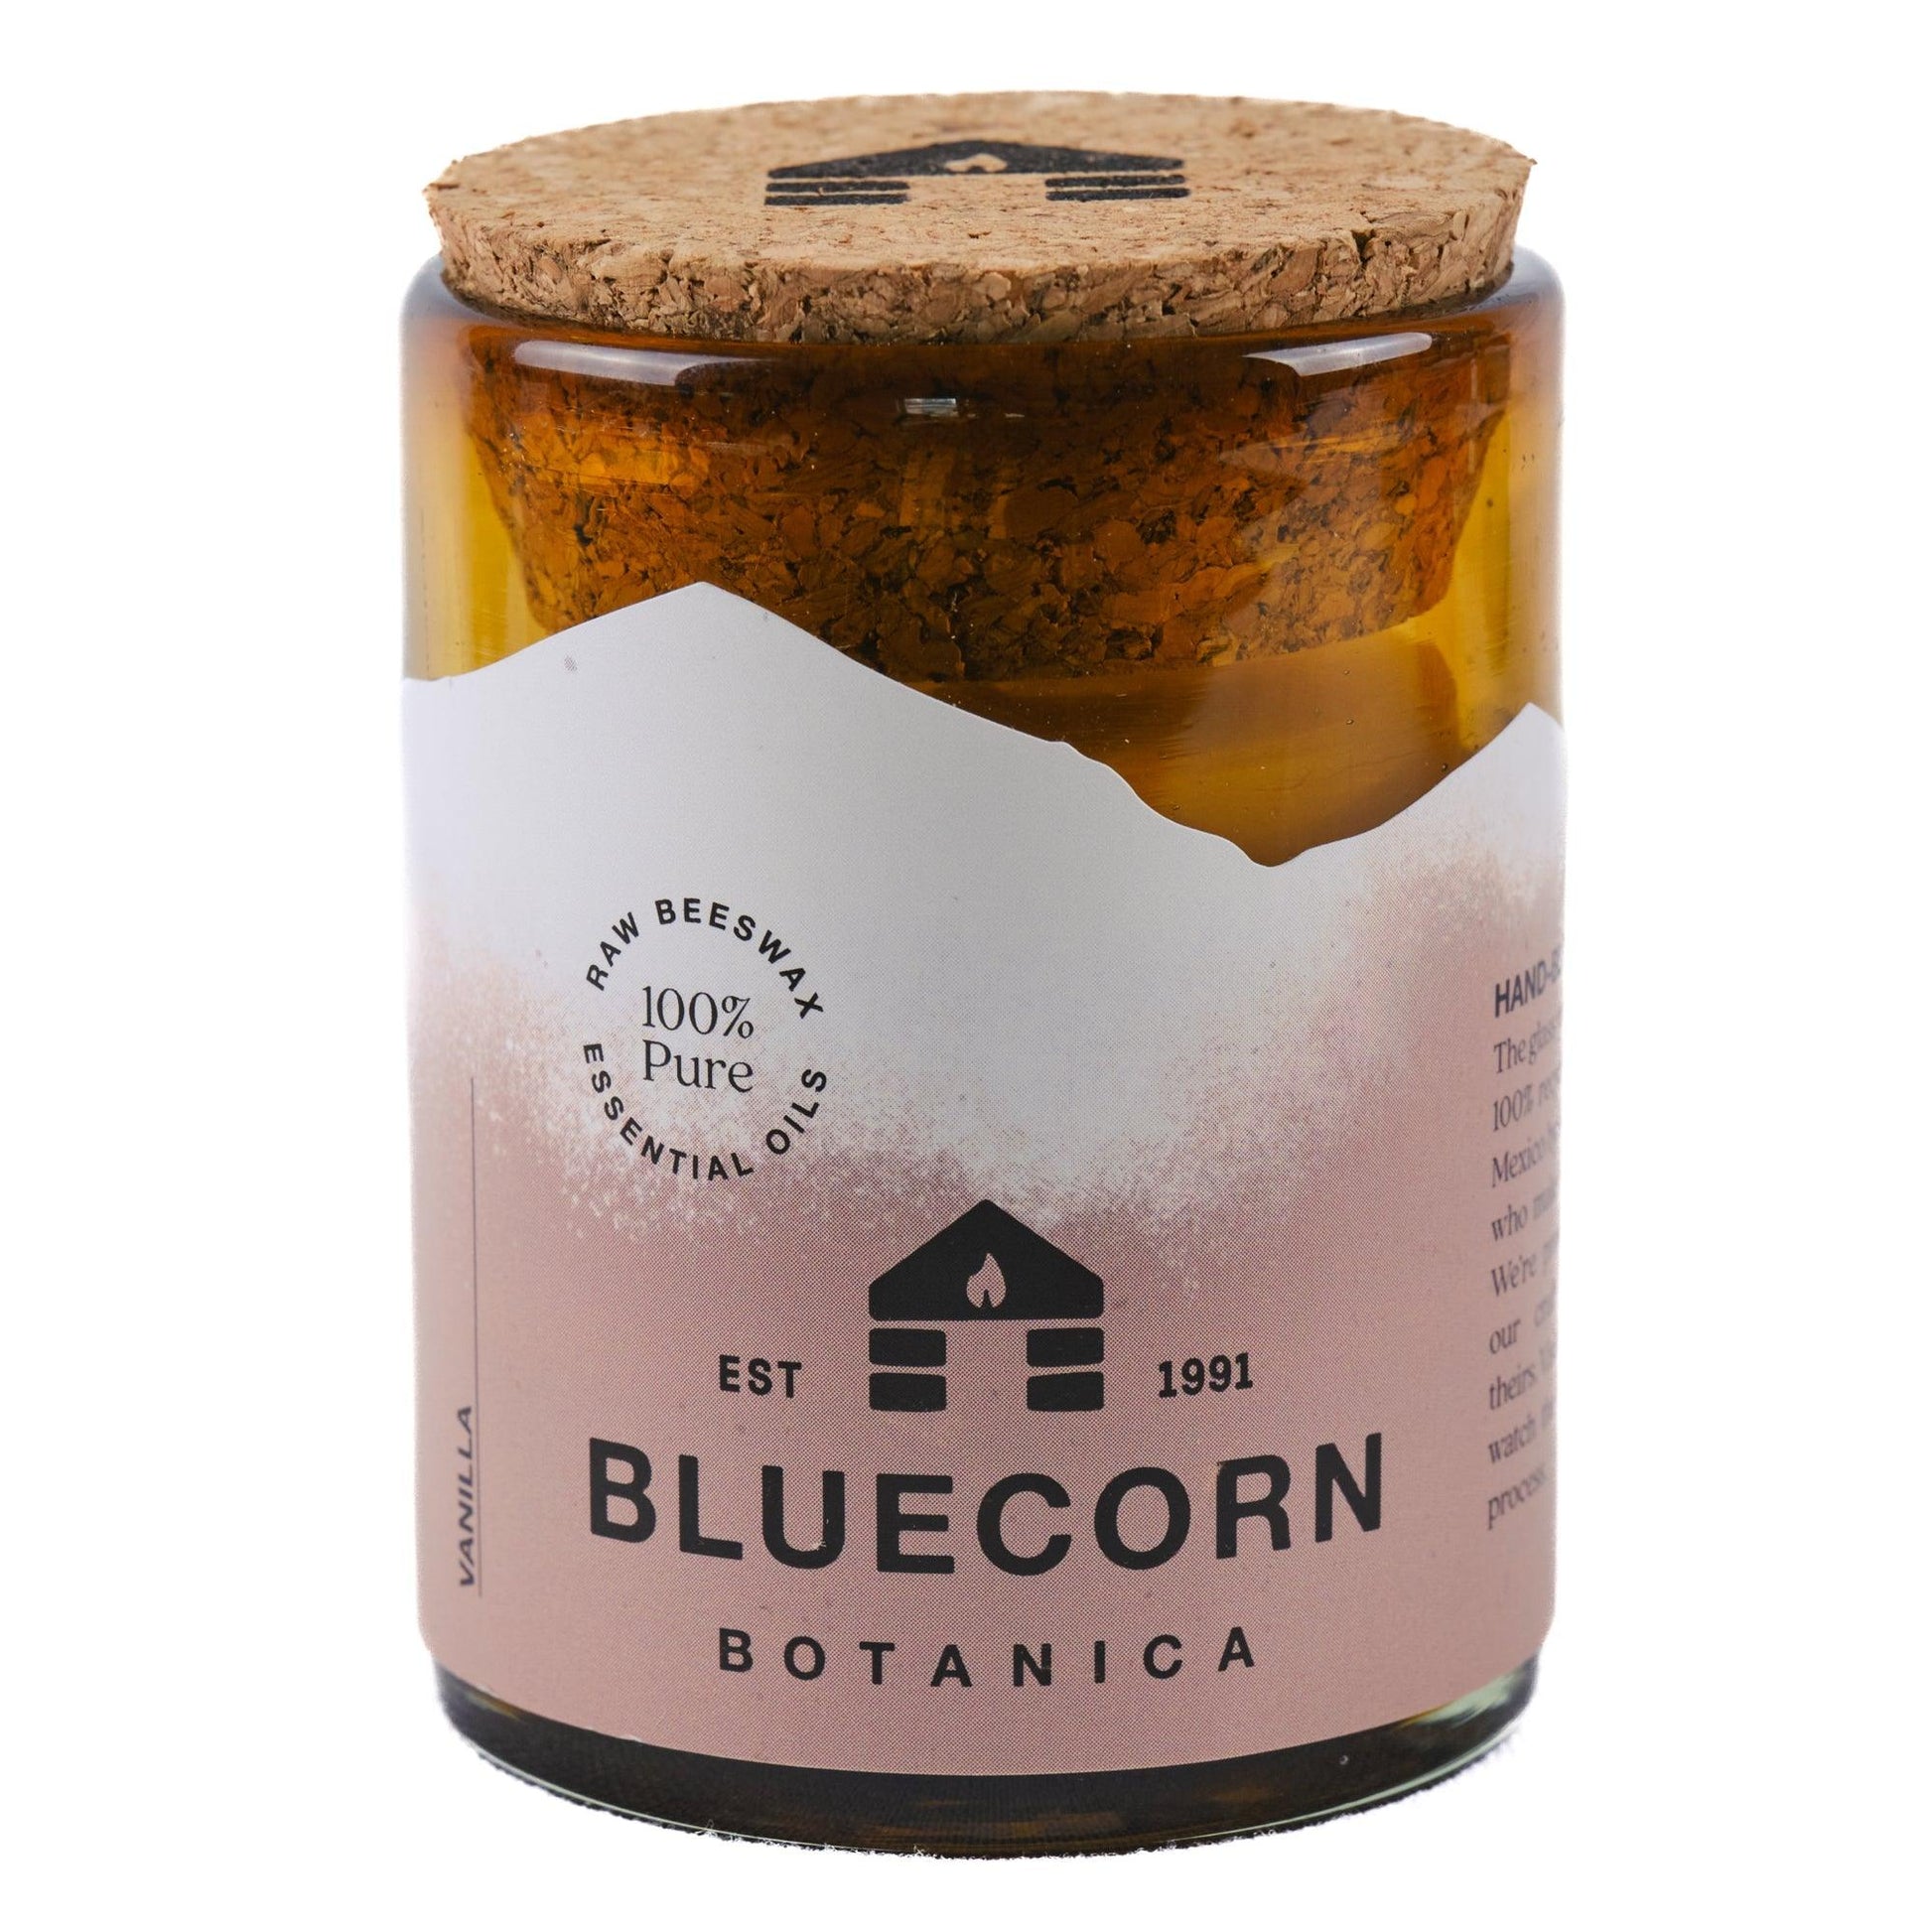 Beeswax Botanica Candle in Blown Glass Gift Box - Bluecorn Candles